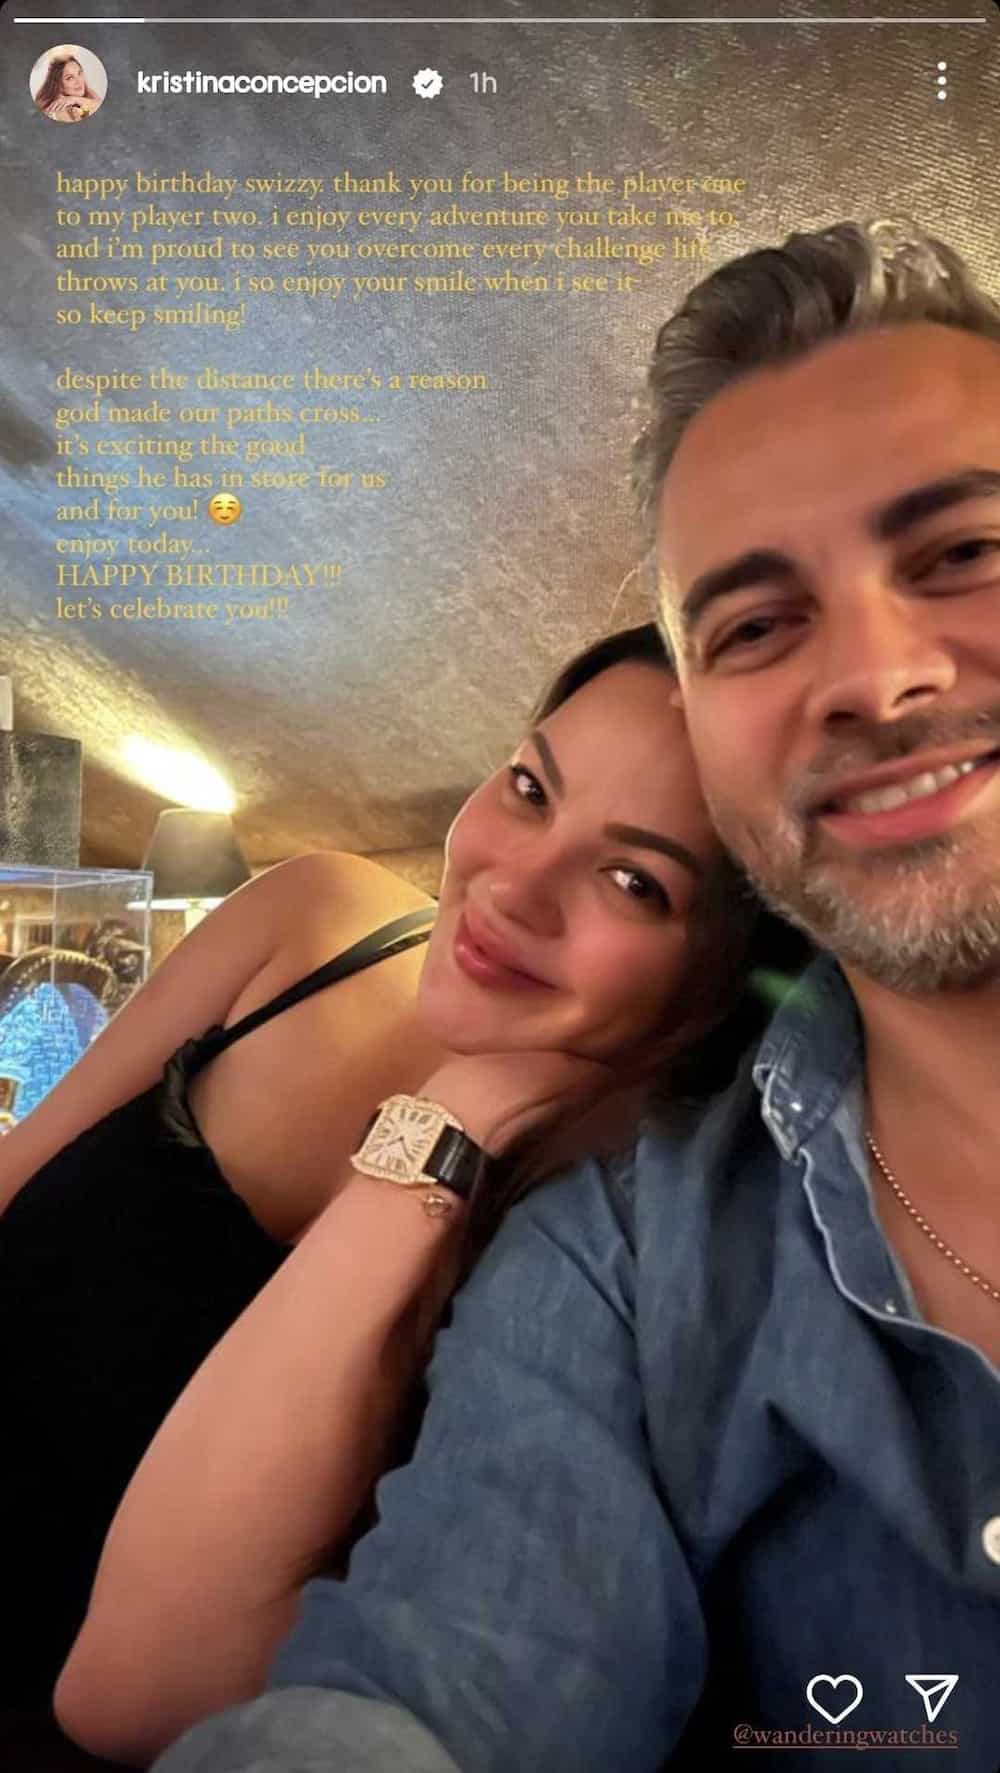 KC Concepcion greets rumored beau Mike Wüthrich on his birthday